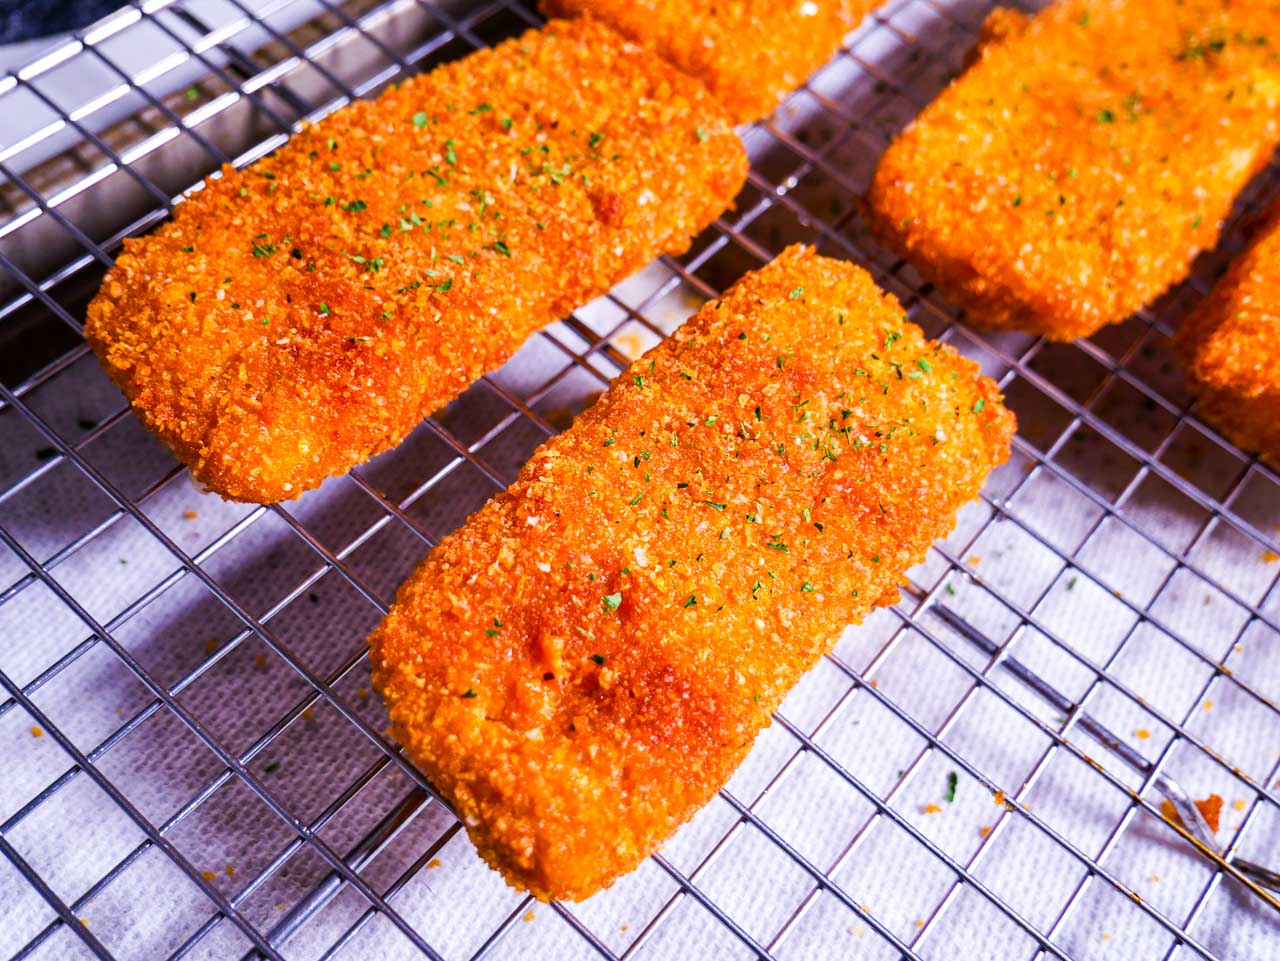 Fried mozzarella sticks cooling on a wire rack with paper towel lined baking sheet below.